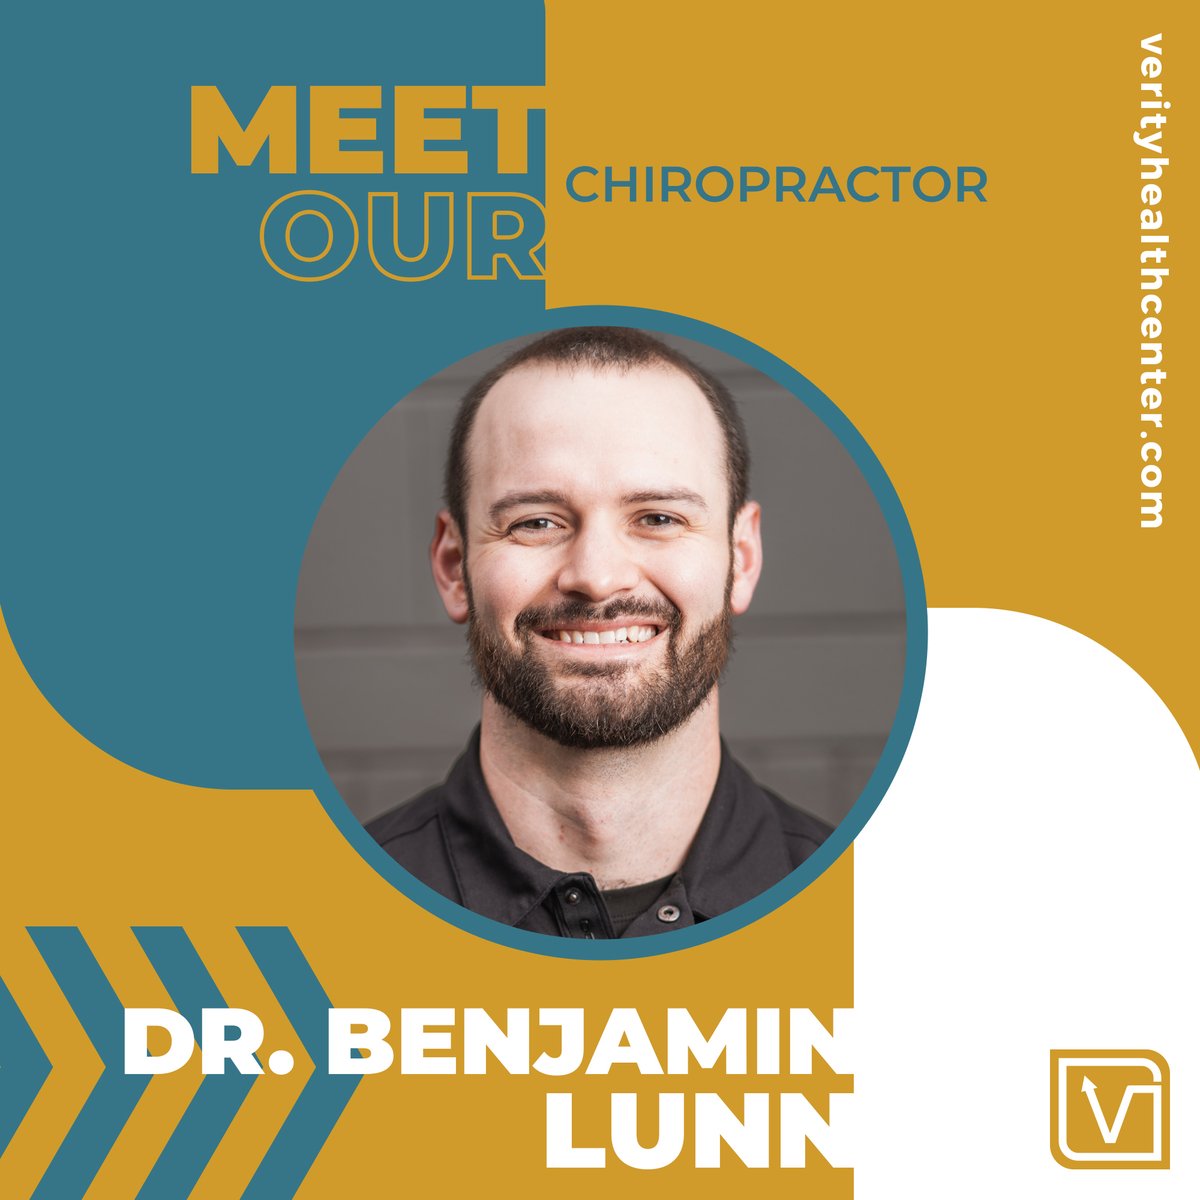 Dr. Benjamin Lunn was born and raised in Tallahassee. He loves serving his community and for him, the “why” is simple: he believes that true healing comes from the inside out, and that the power that made the body, heals the body. #meettheteam